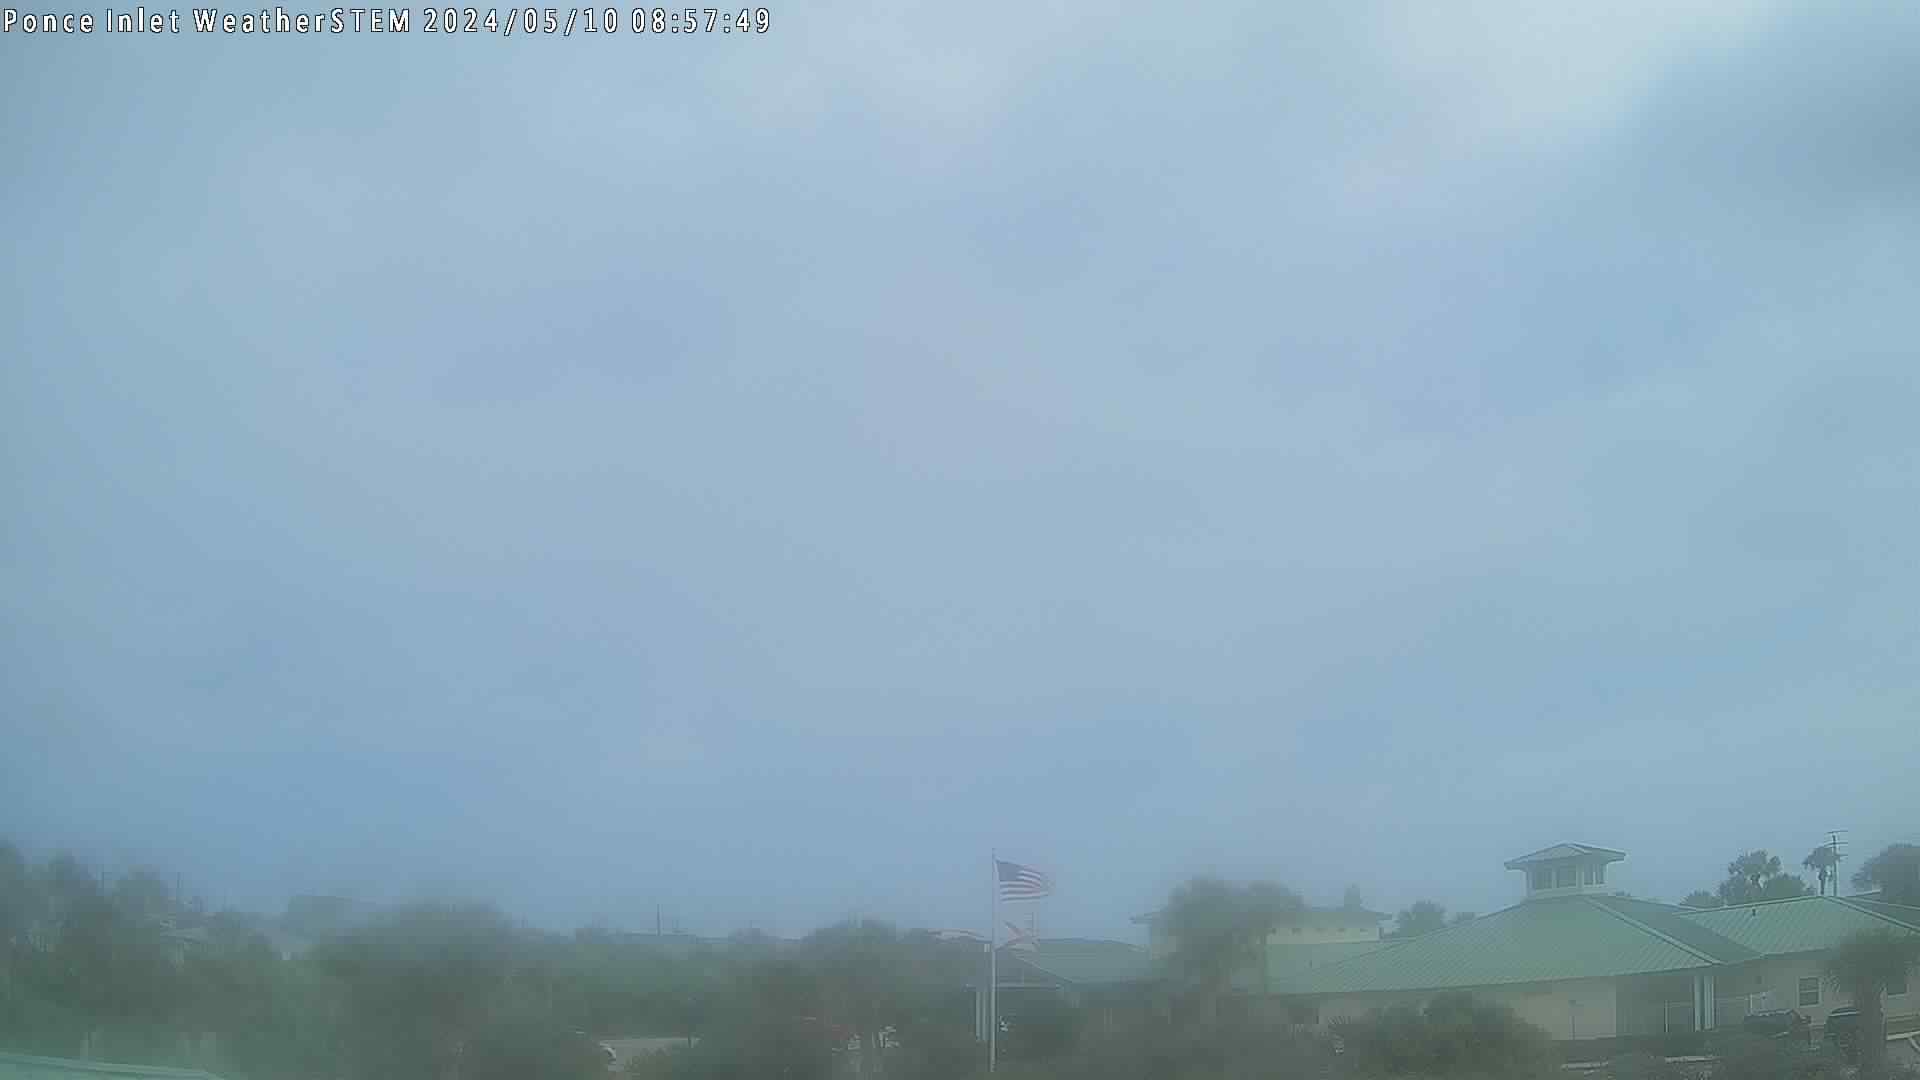  WeatherSTEM Cloud Camera PonceInletWx in Volusia County, Florida FL at Ponce Inlet Town Hall